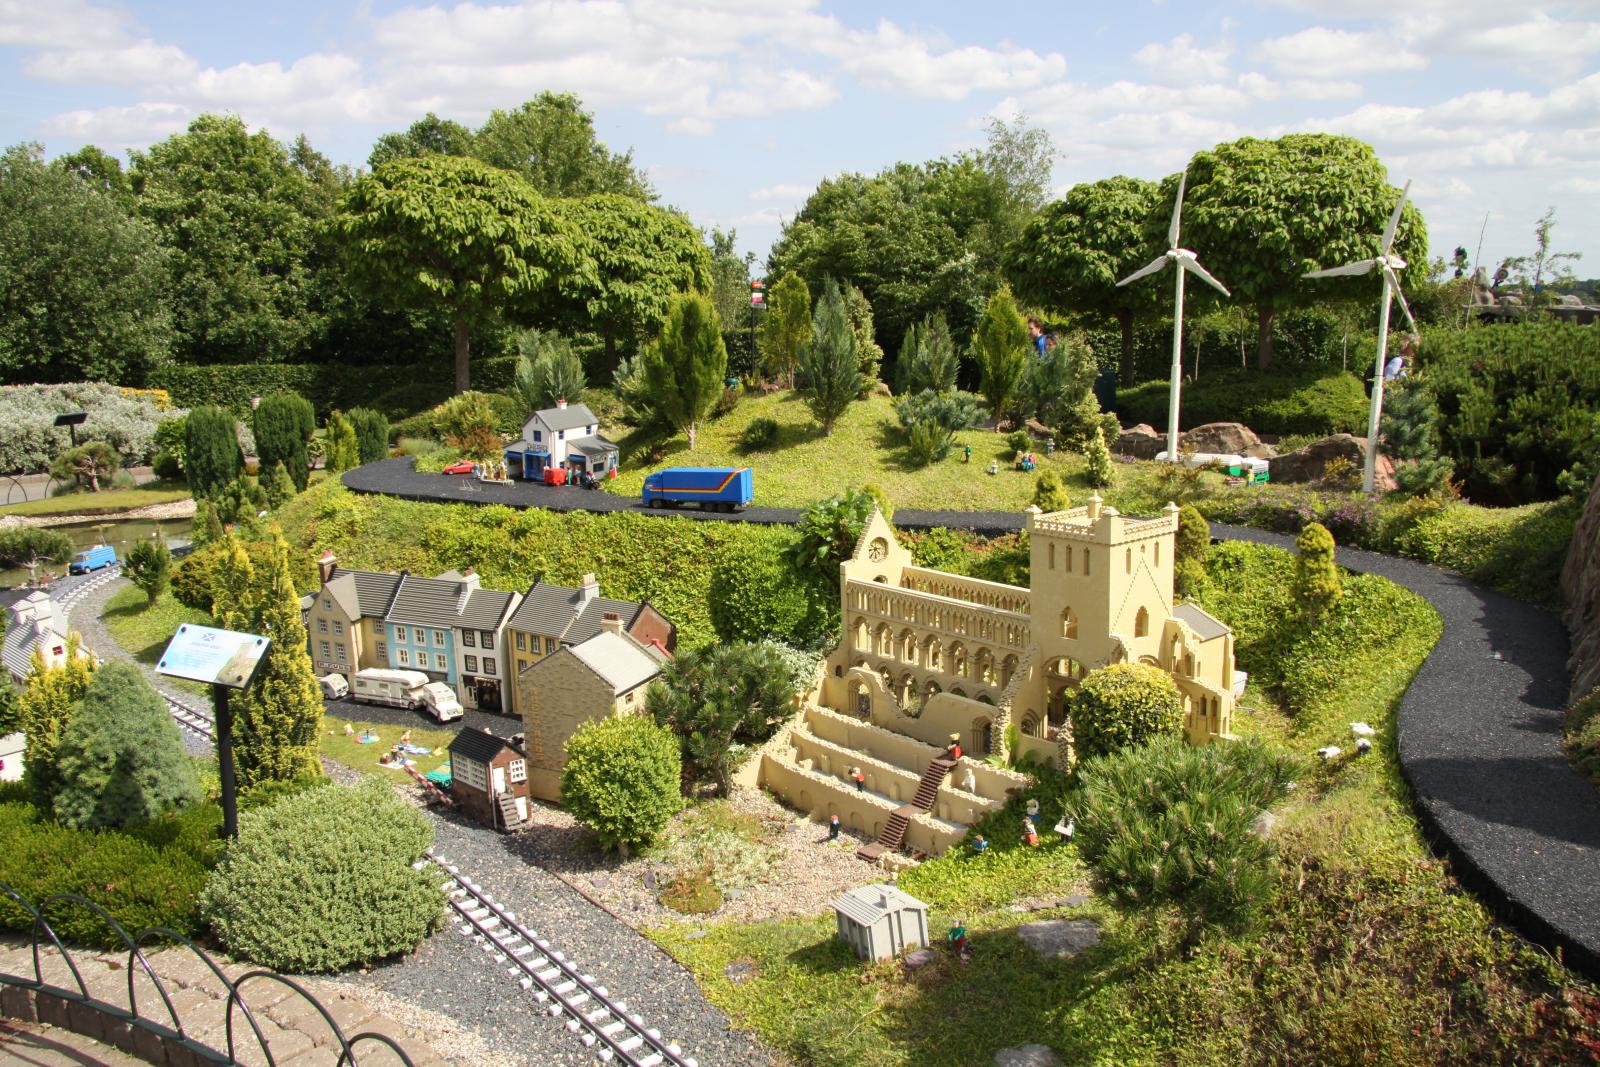 a model train set with a model railroad and buildings